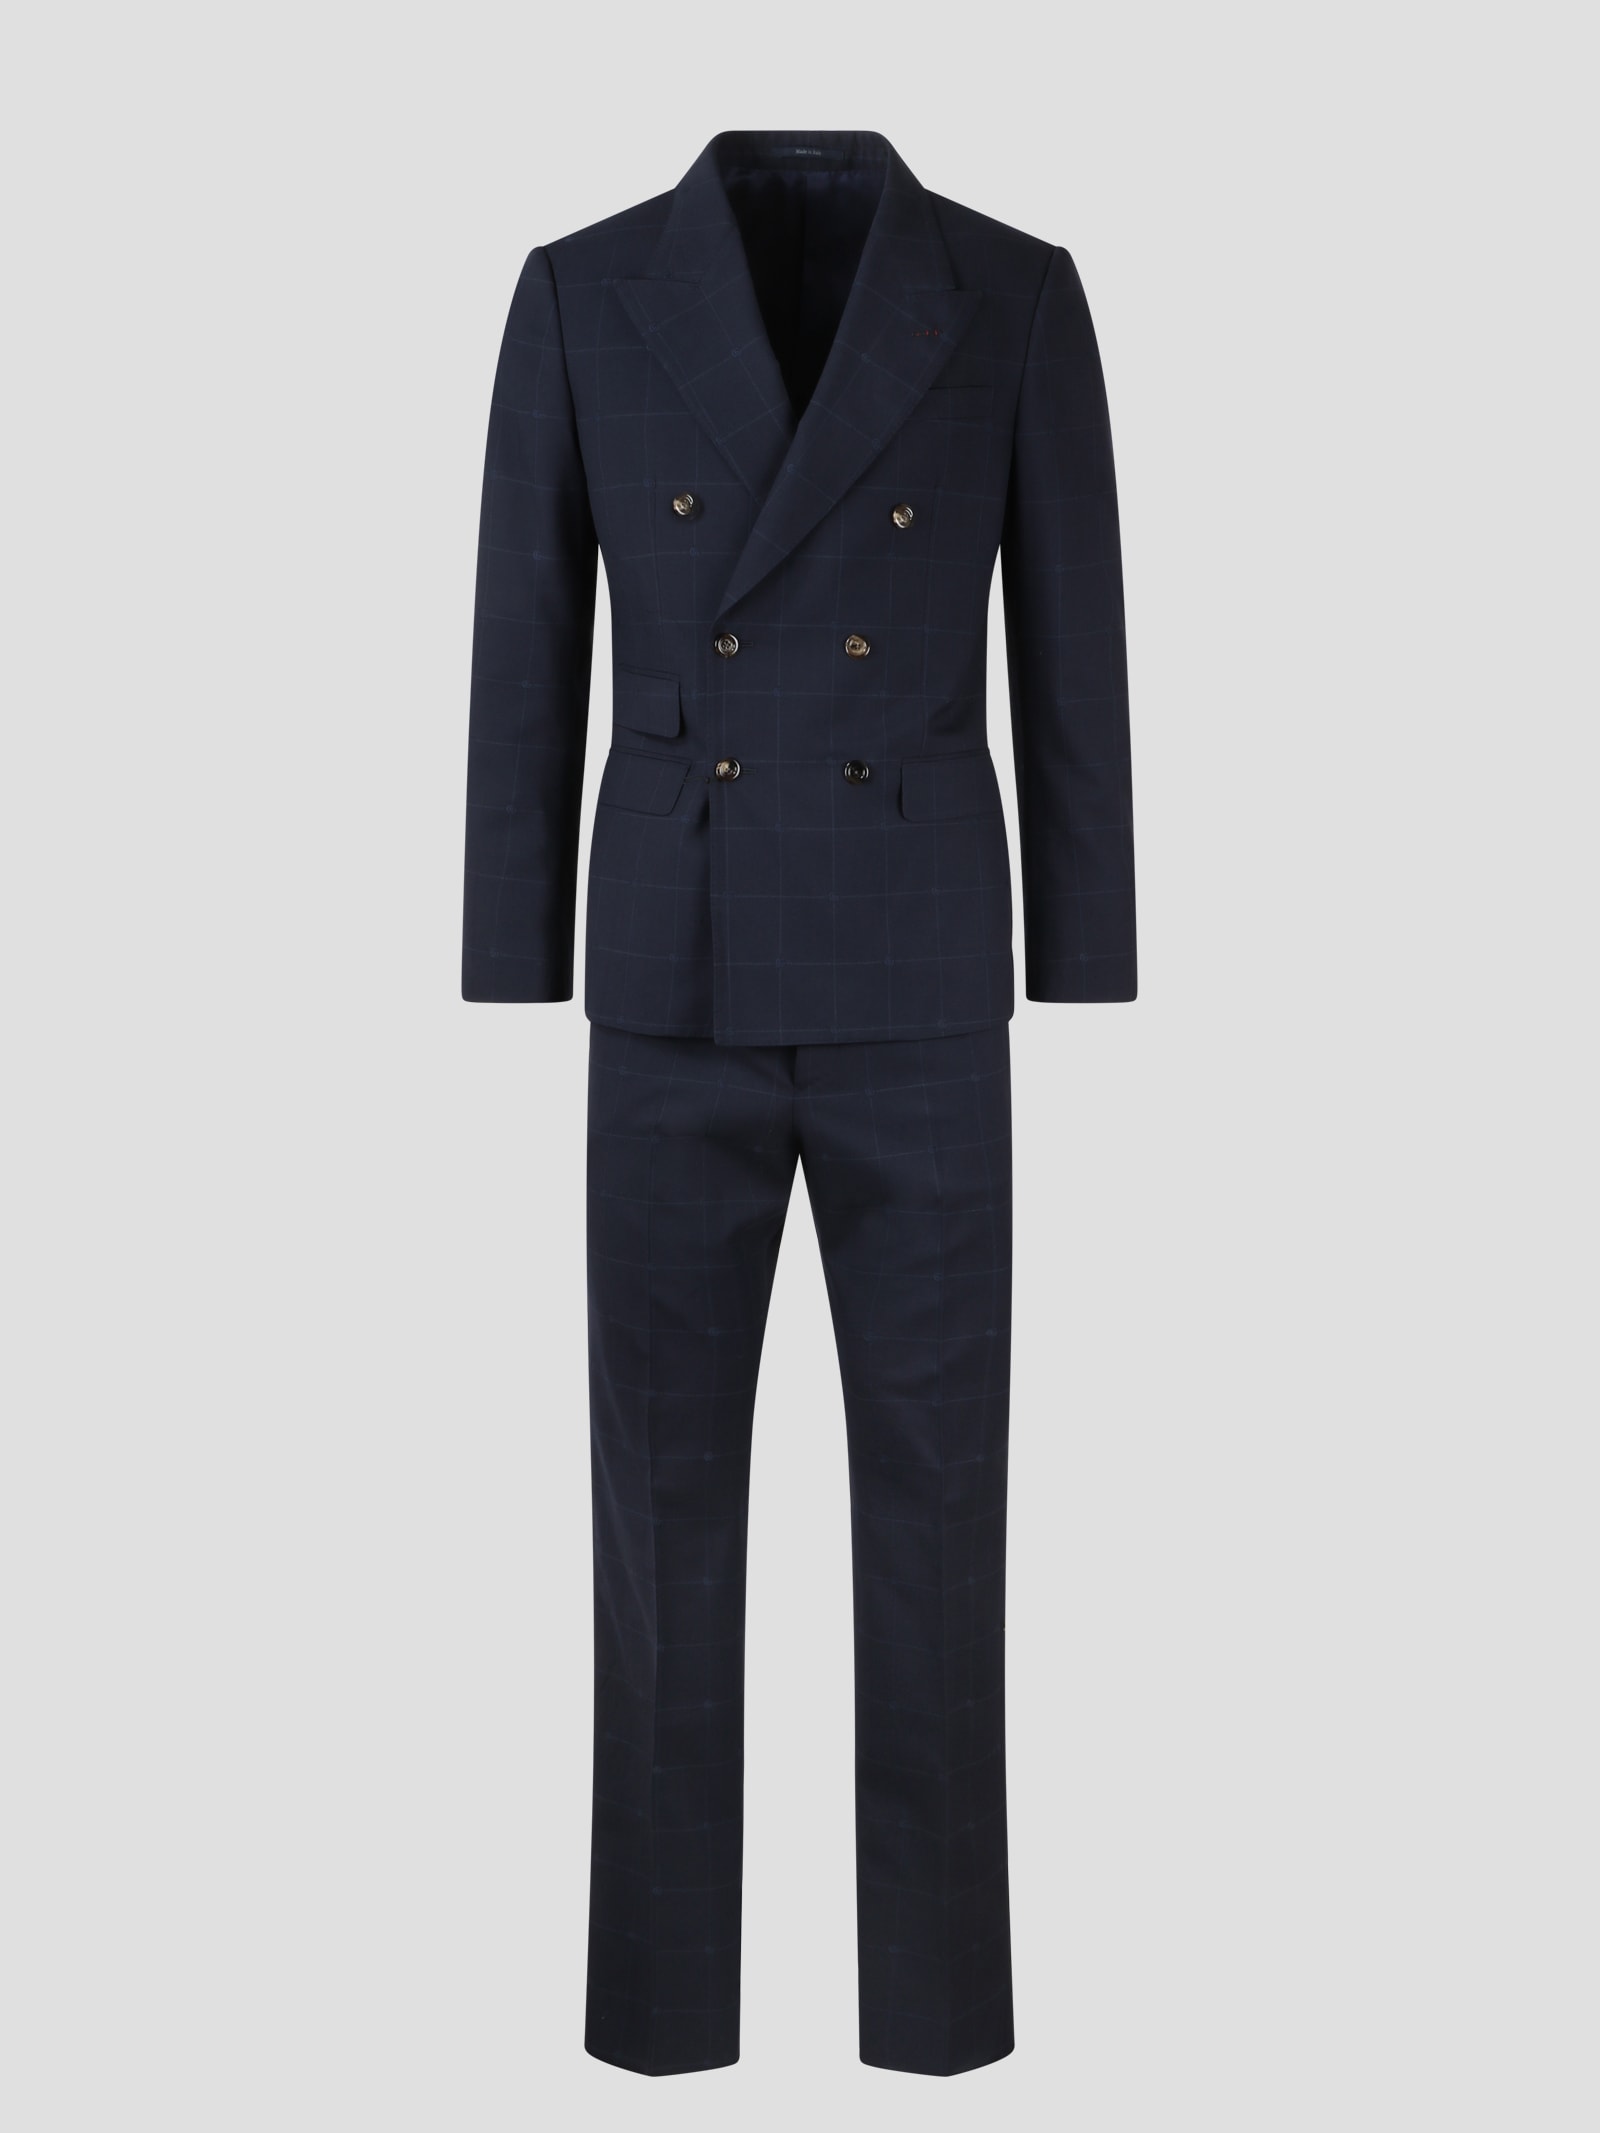 GUCCI GG OVERCHECK WOOL SUIT